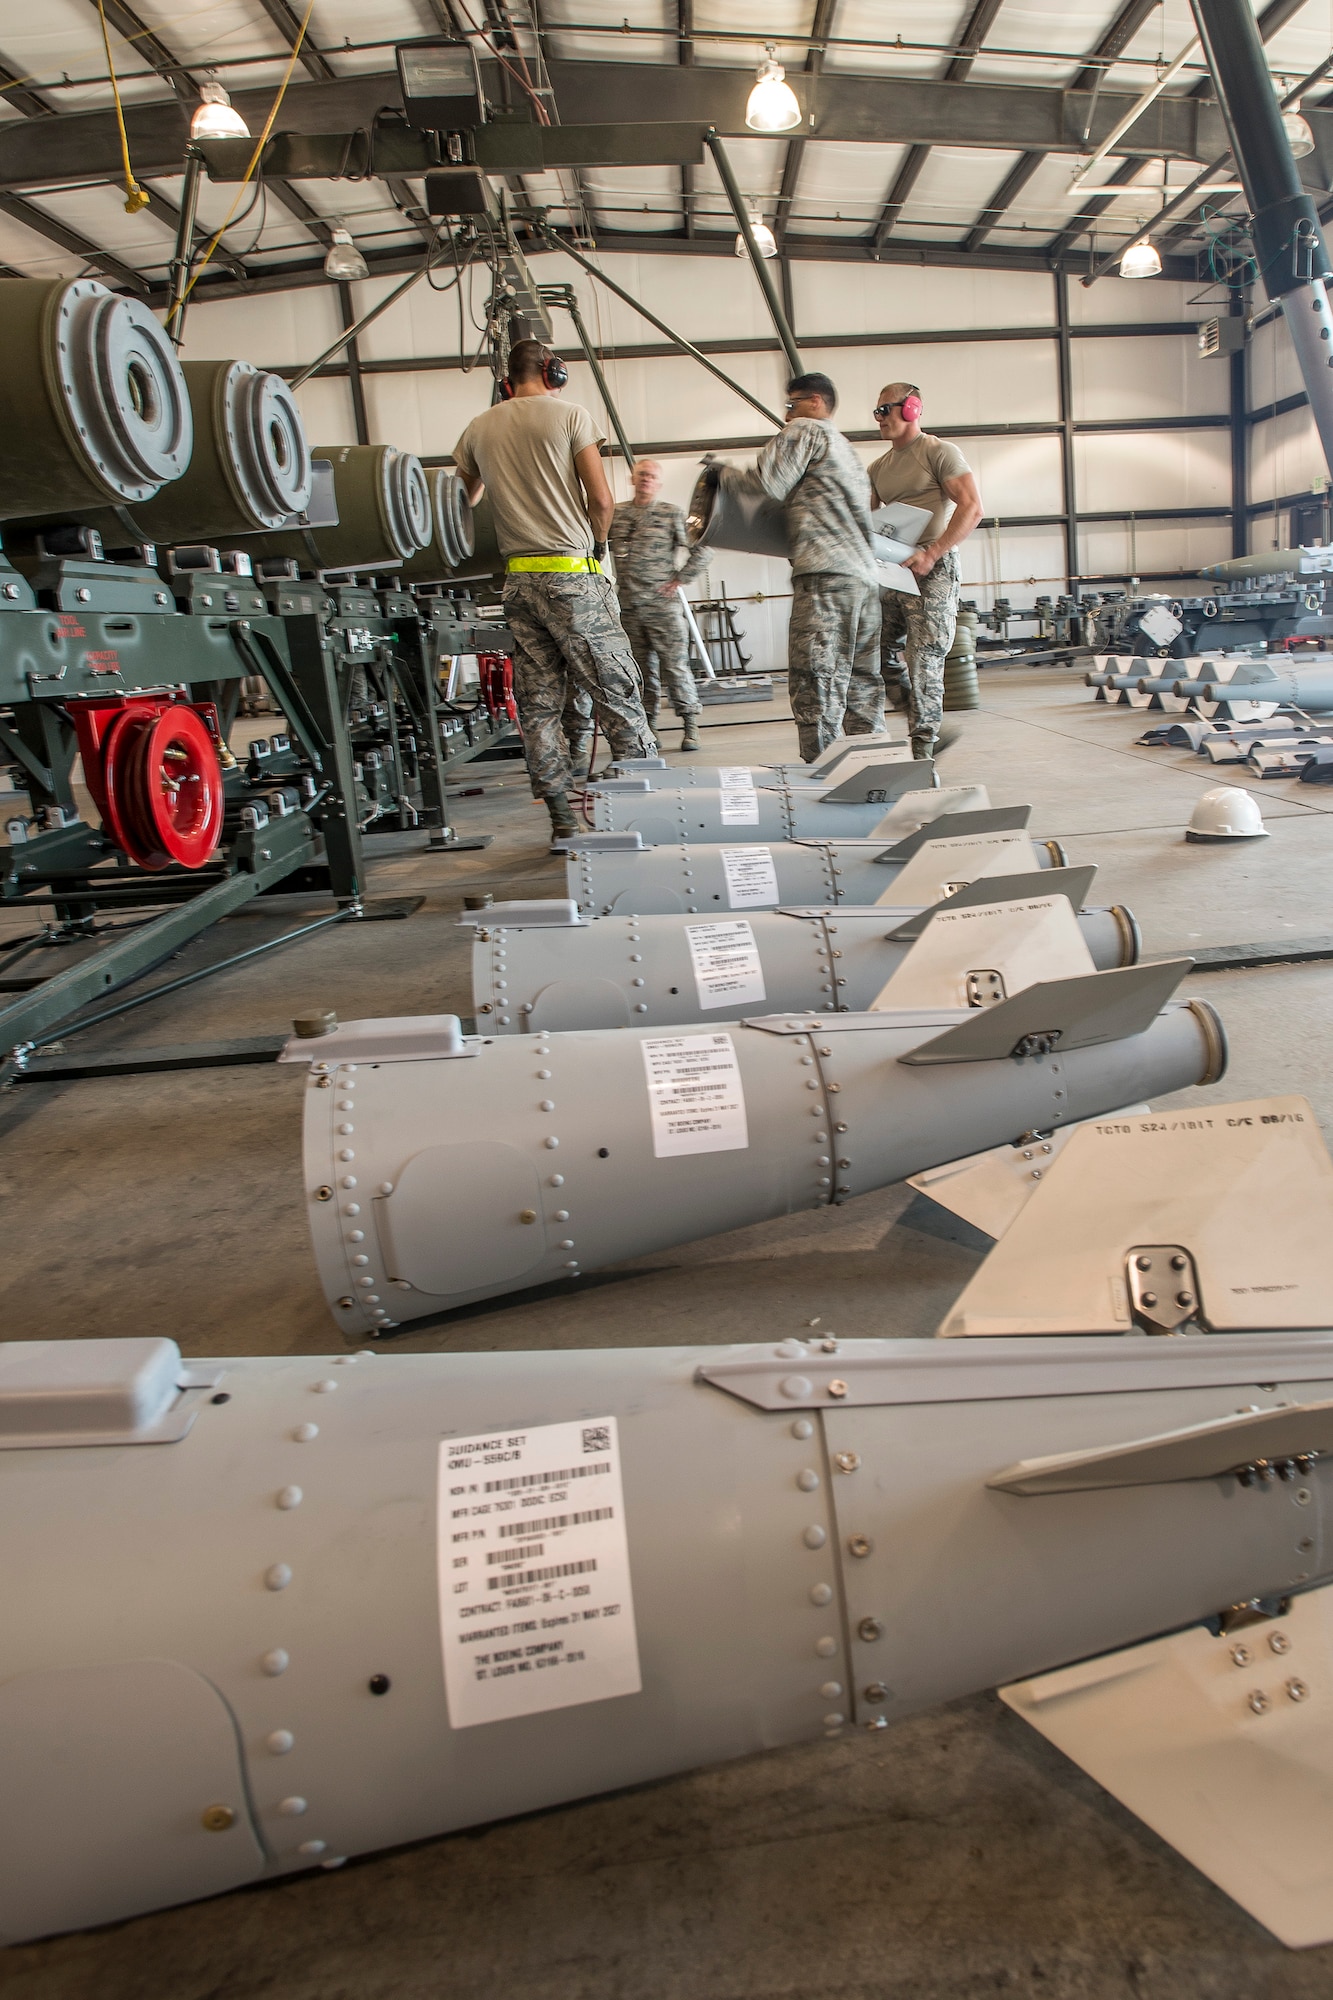 Airmen from the 325th Maintenance Squadron, Tyndall Air Force Base, Fla., lift a GBU-32 bomb tail section onto the primary bomb body Aug. 2 at Hill AFB, Utah. The bombs being assembled will be dropped later by aircraft participating in exercise Combat Hammer at Hill AFB and the Utah Test and Training Range. (U.S. Air Force photo by Paul Holcomb)